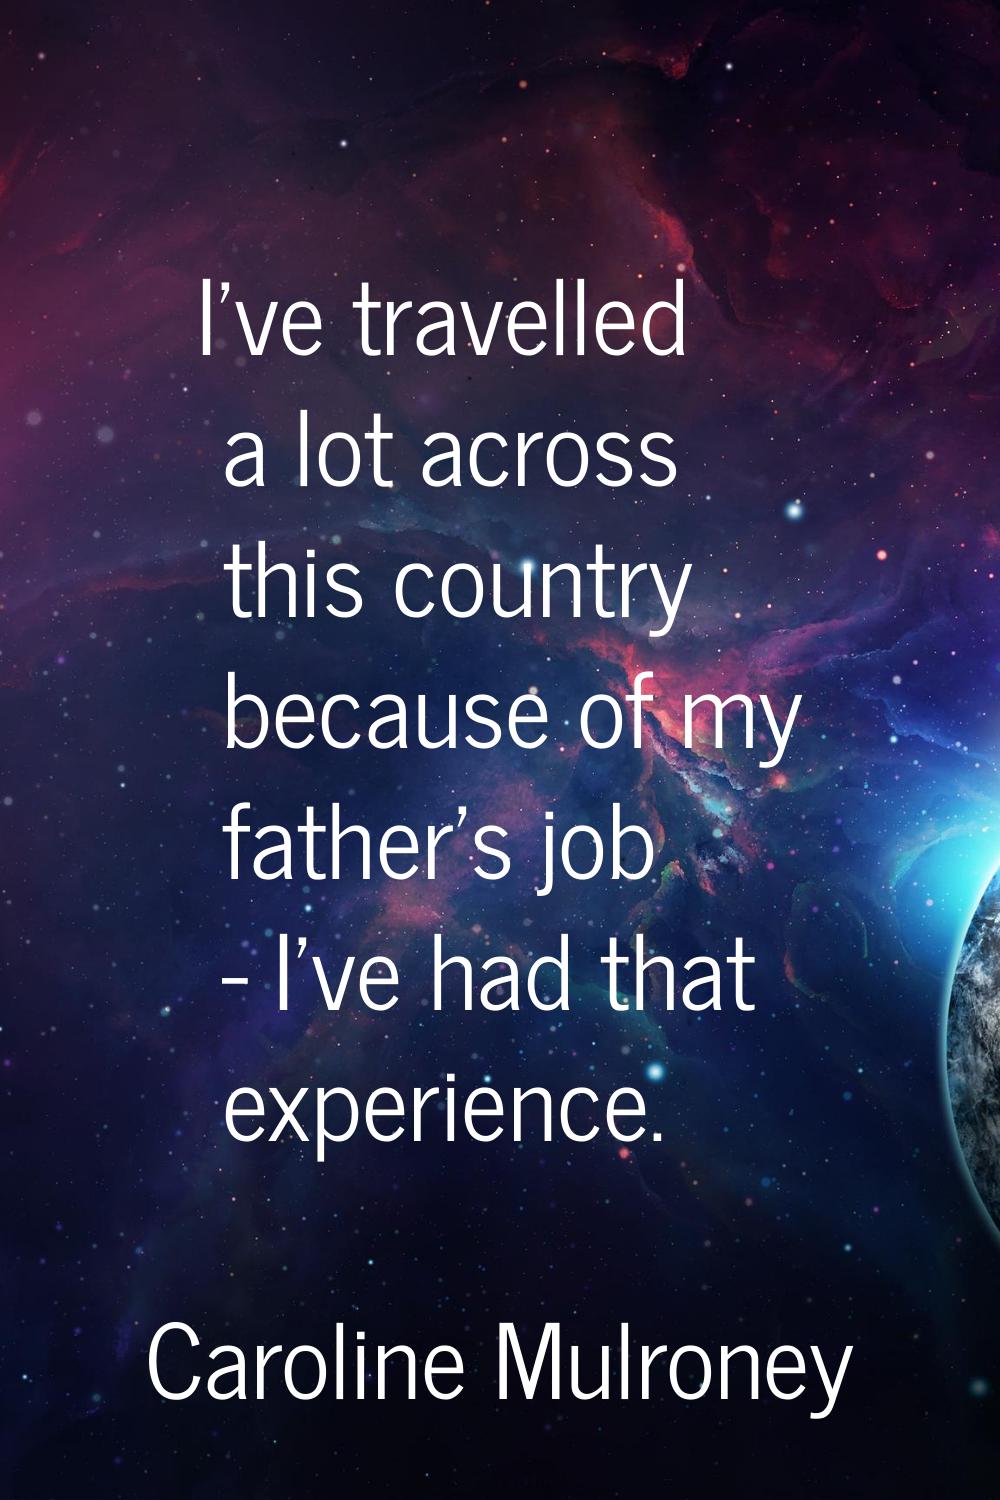 I've travelled a lot across this country because of my father's job - I've had that experience.